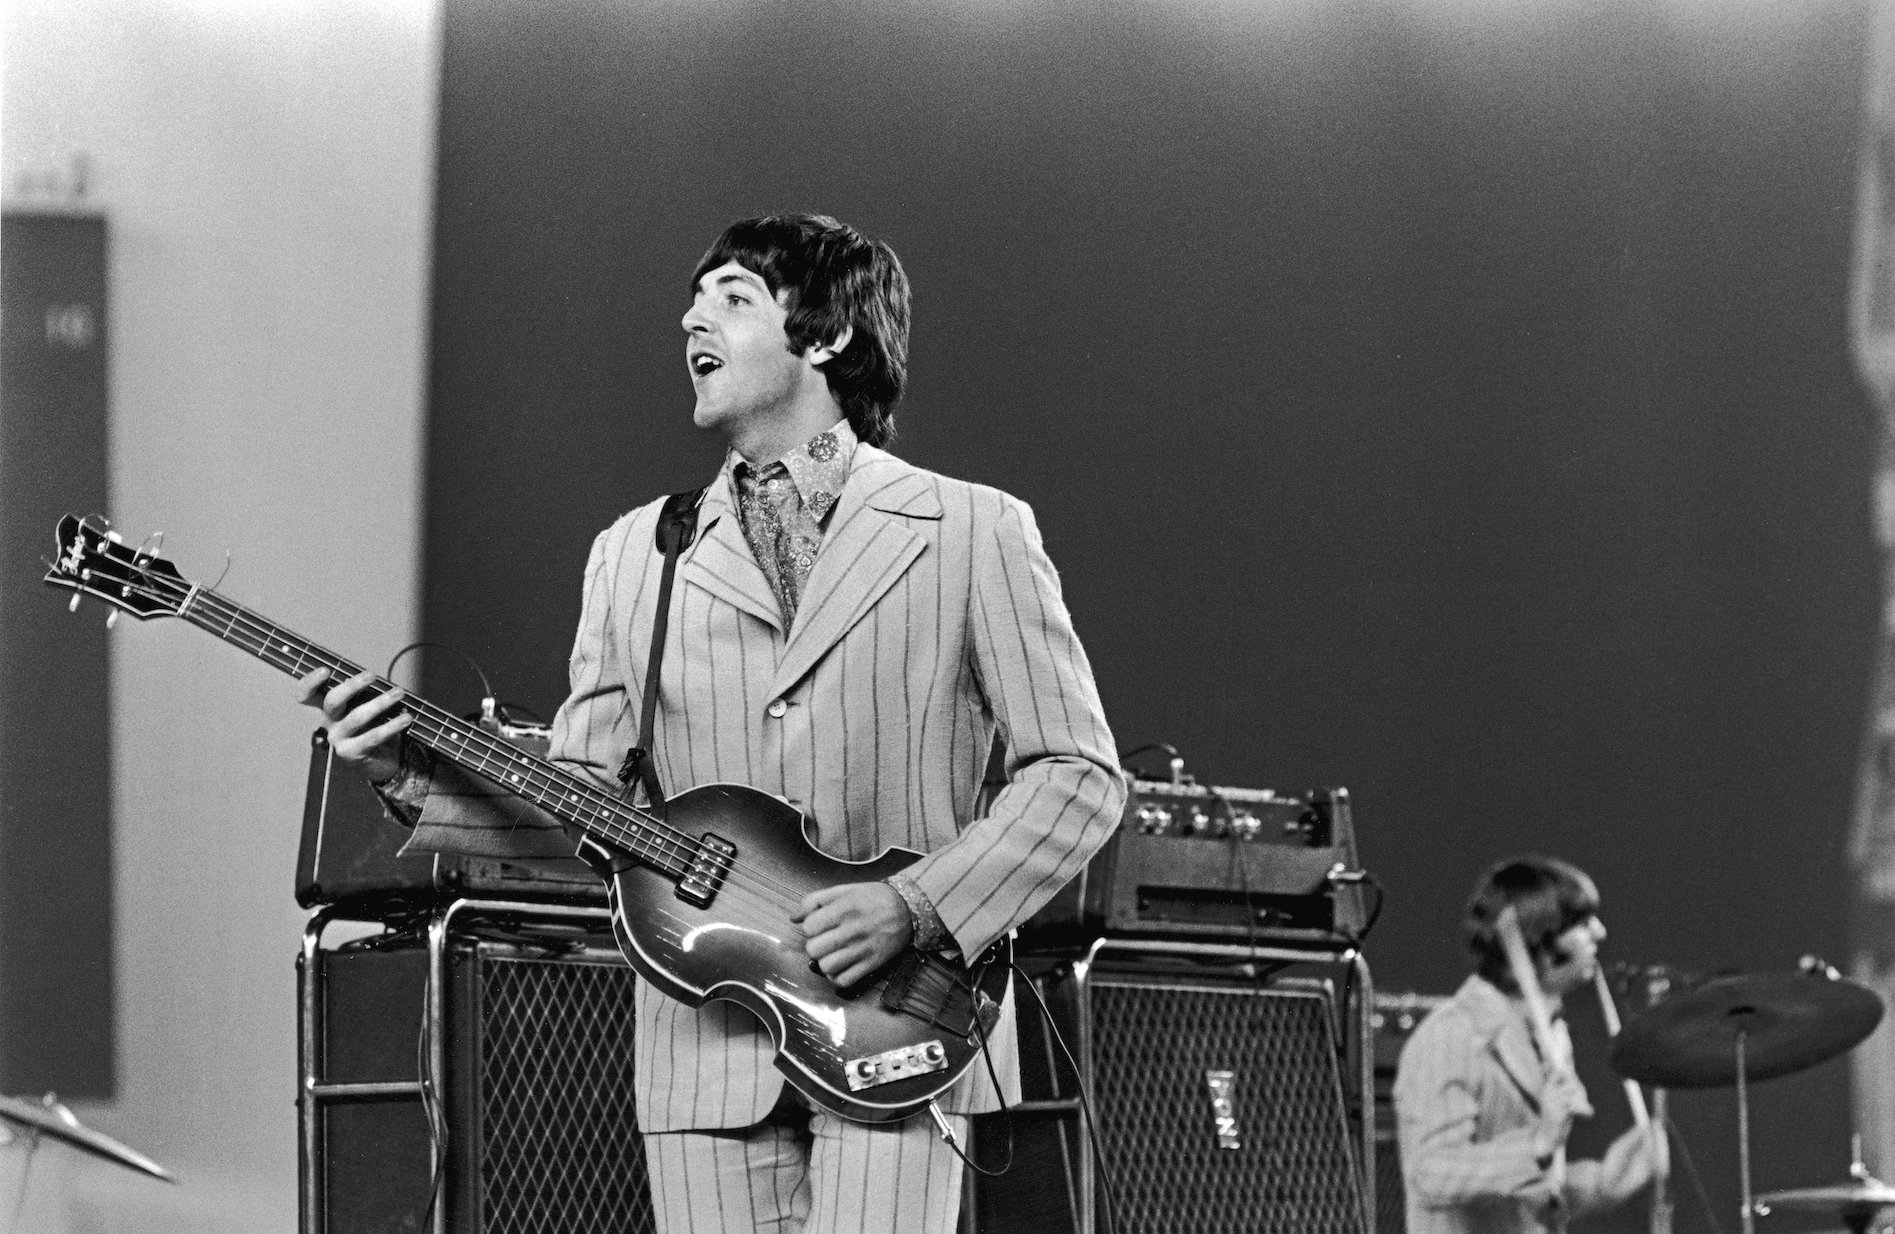 Paul McCartney performs with The Beatles during their final tour